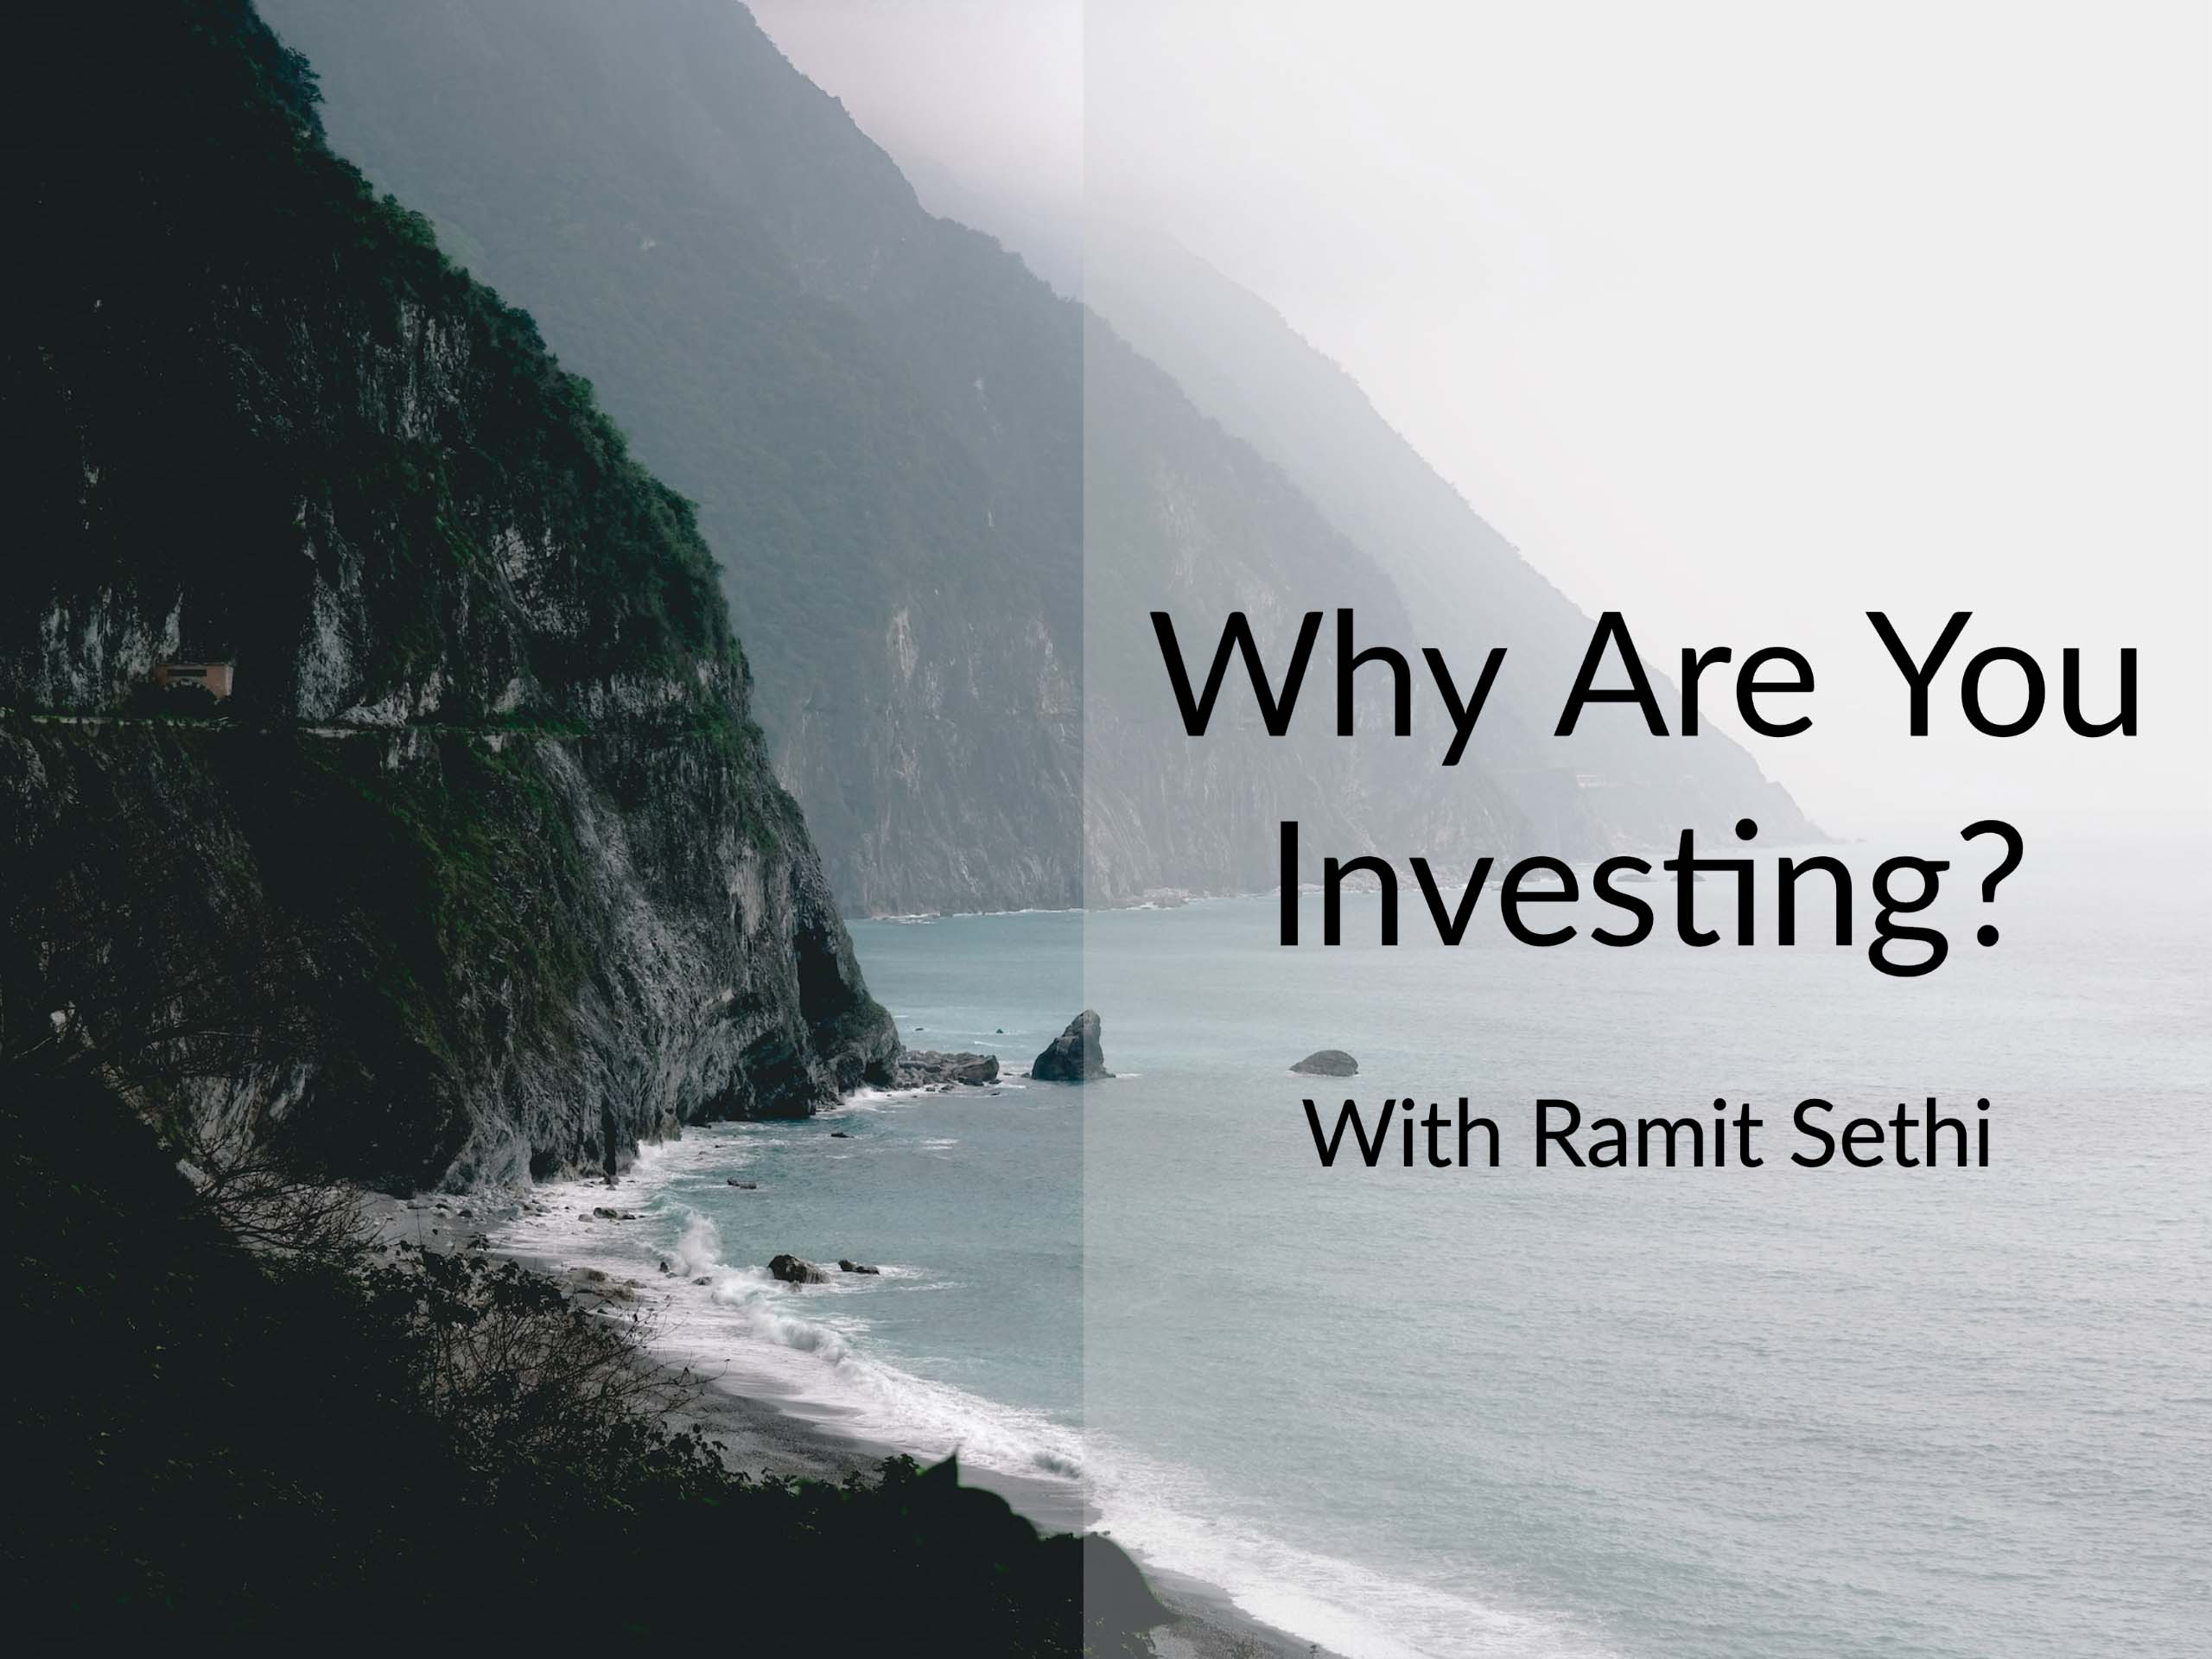 438: Why Are You Investing? Defining Your Rich Life with Ramit Sethi